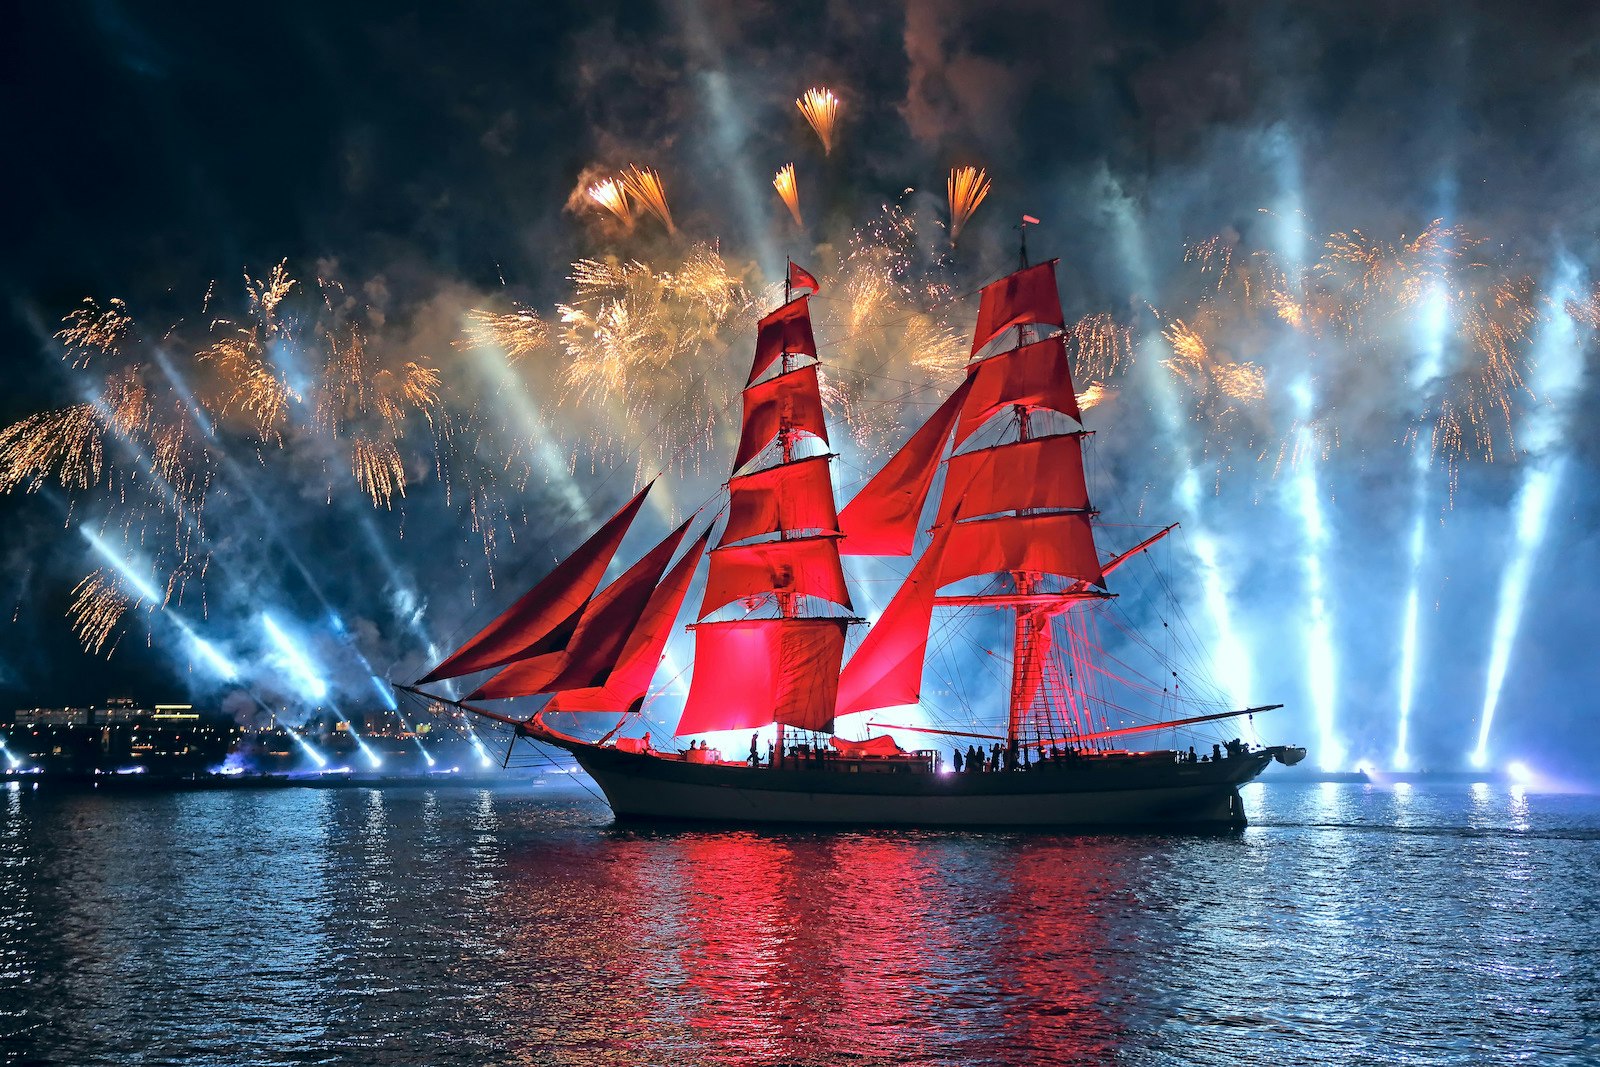 Celebration Scarlet Sails show during the White Nights Festival, June 21, 2015, St. Petersburg, Russia.